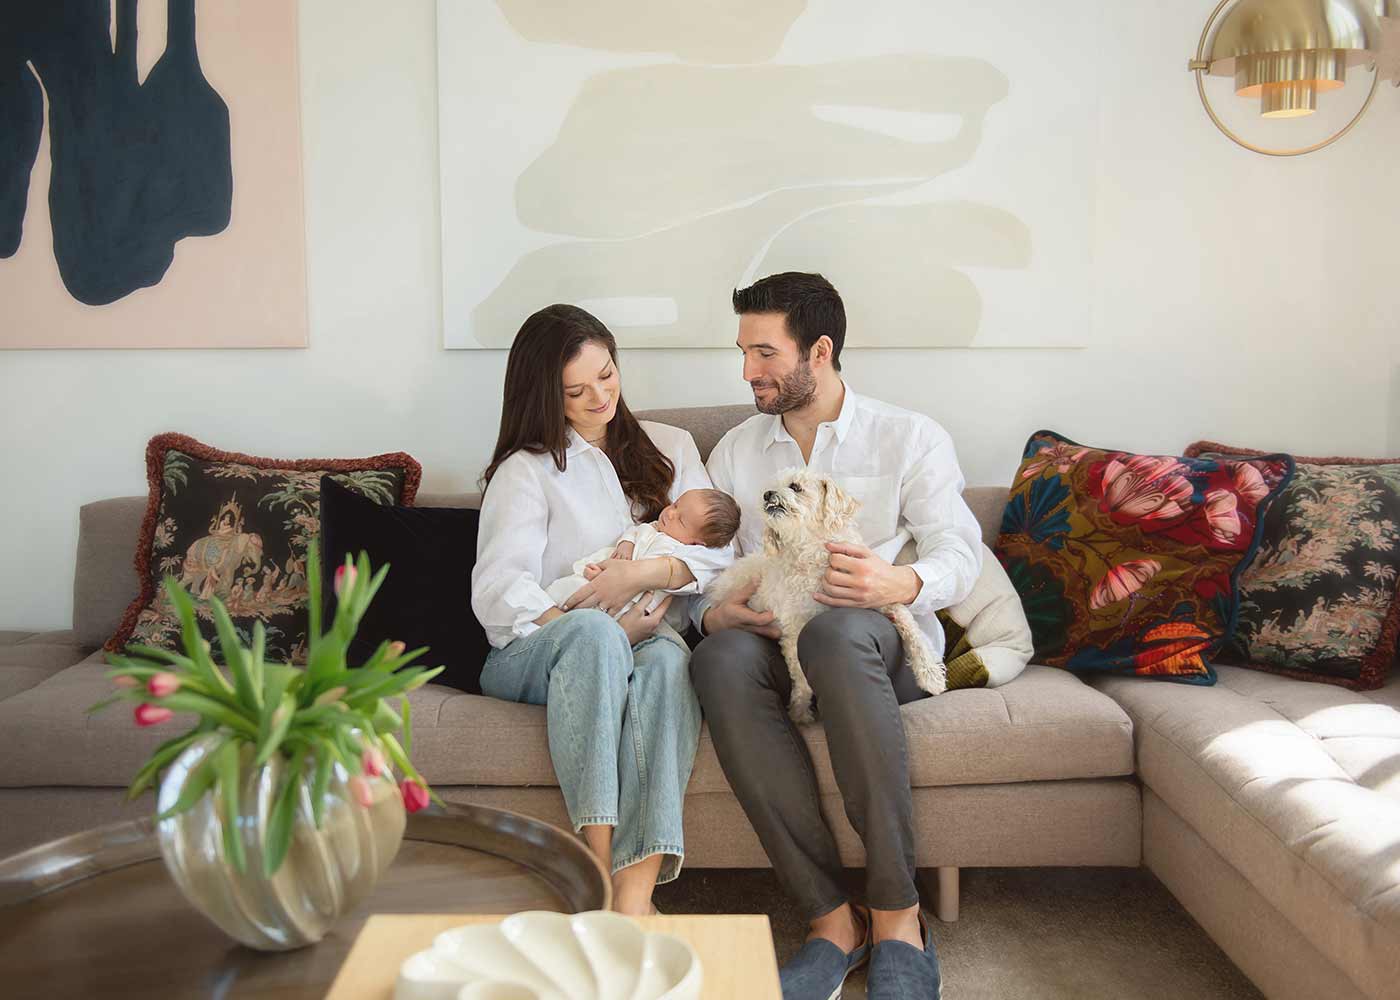 Mother and Father sharing a moment with their newborn baby at their NYC condominium